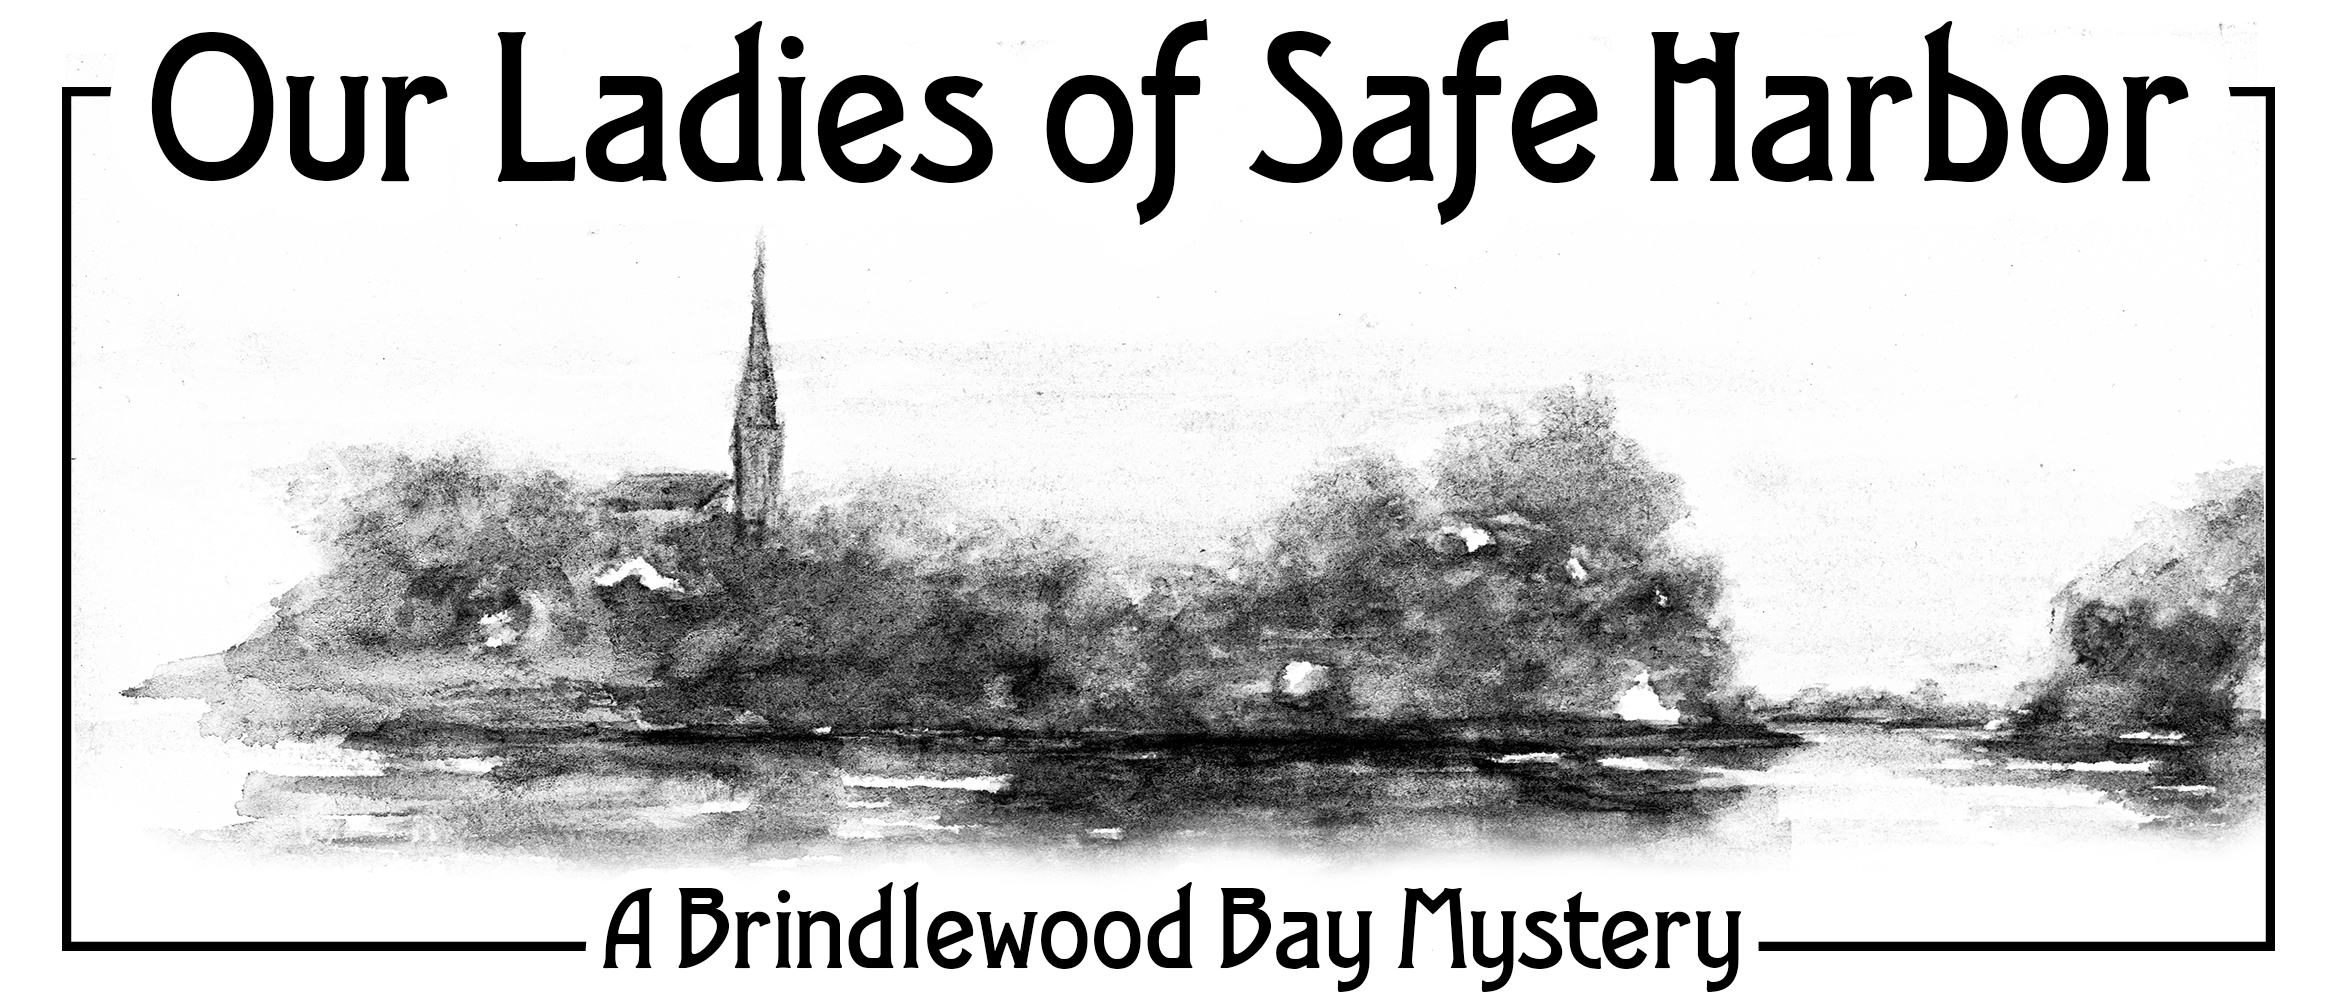 Our Ladies of Safe Harbor: A Brindlewood Bay Mystery